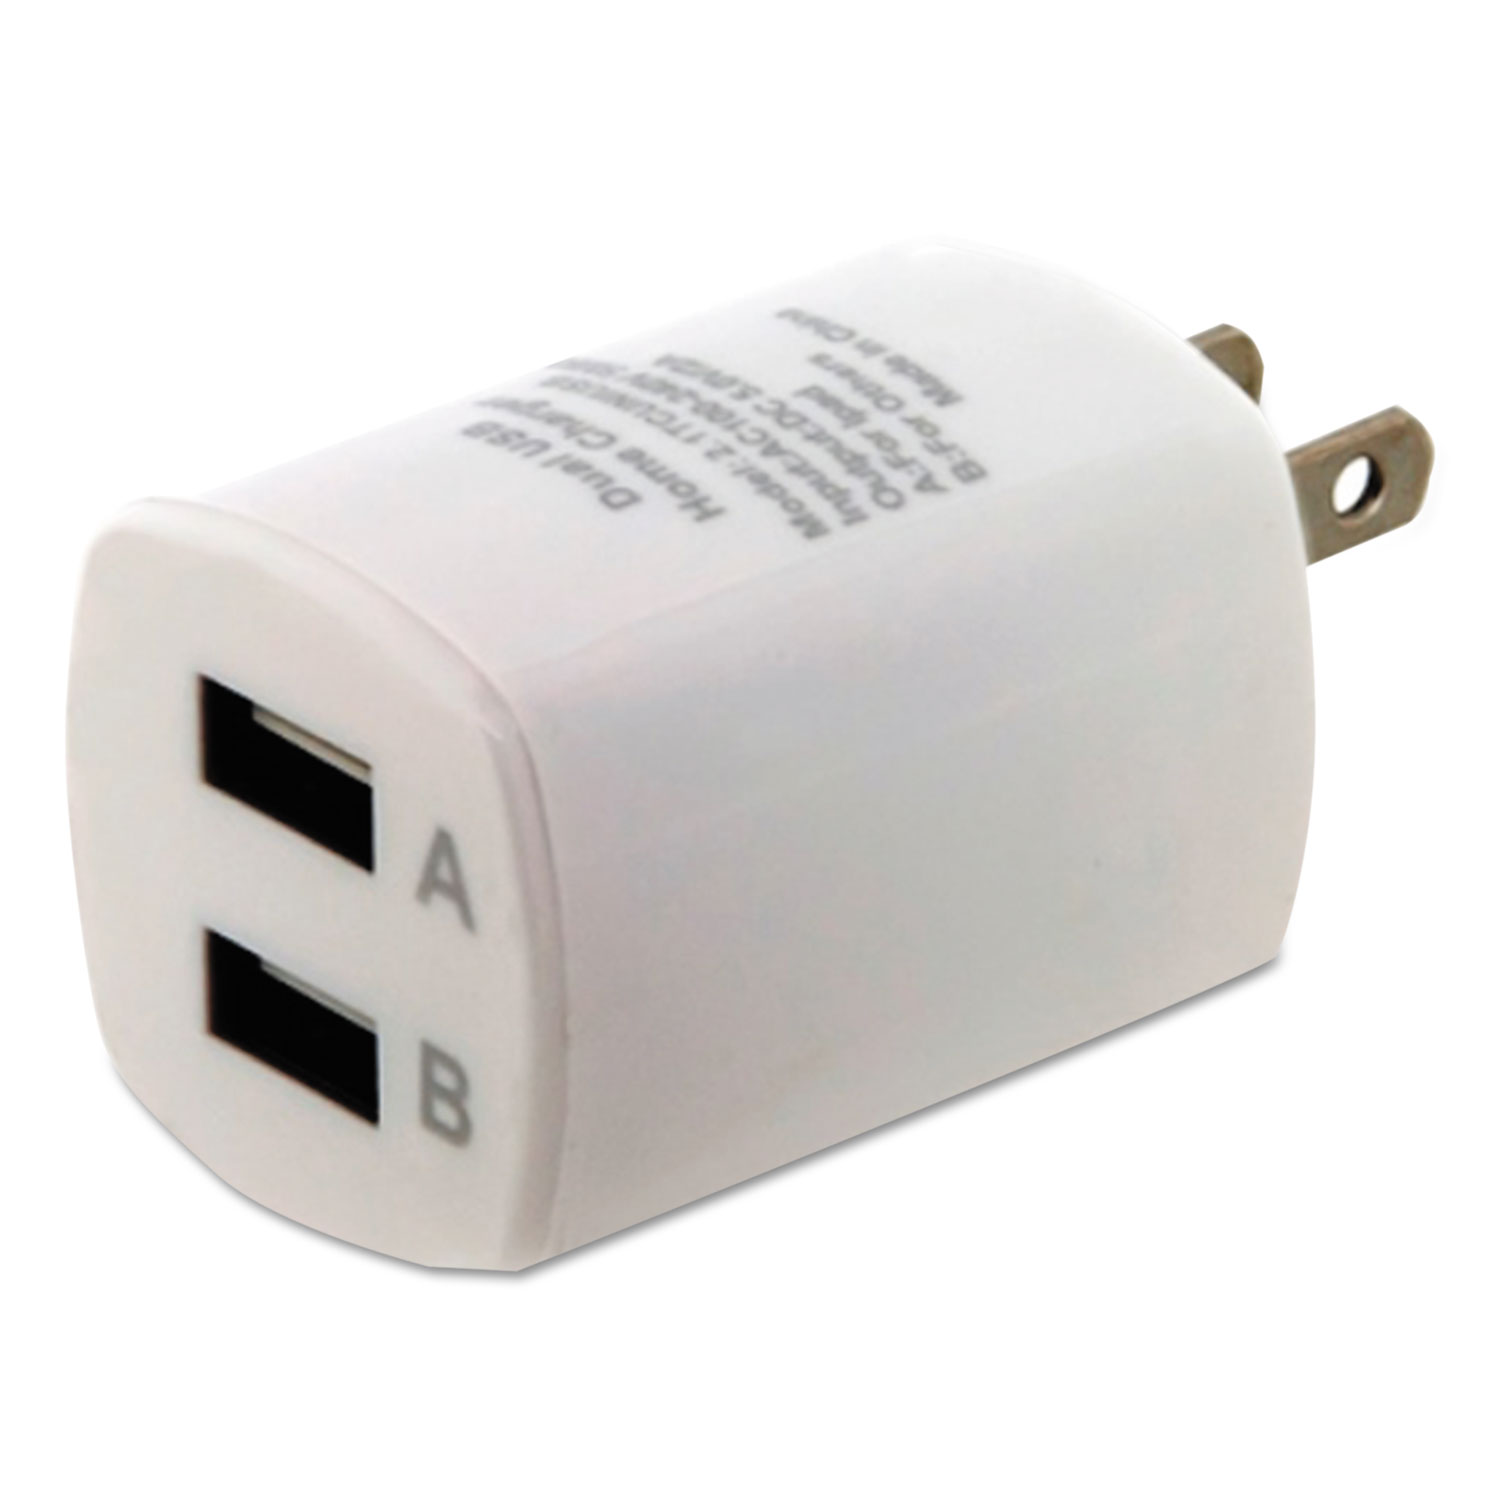 Universal USB Home Charger, 2 Outlets, White